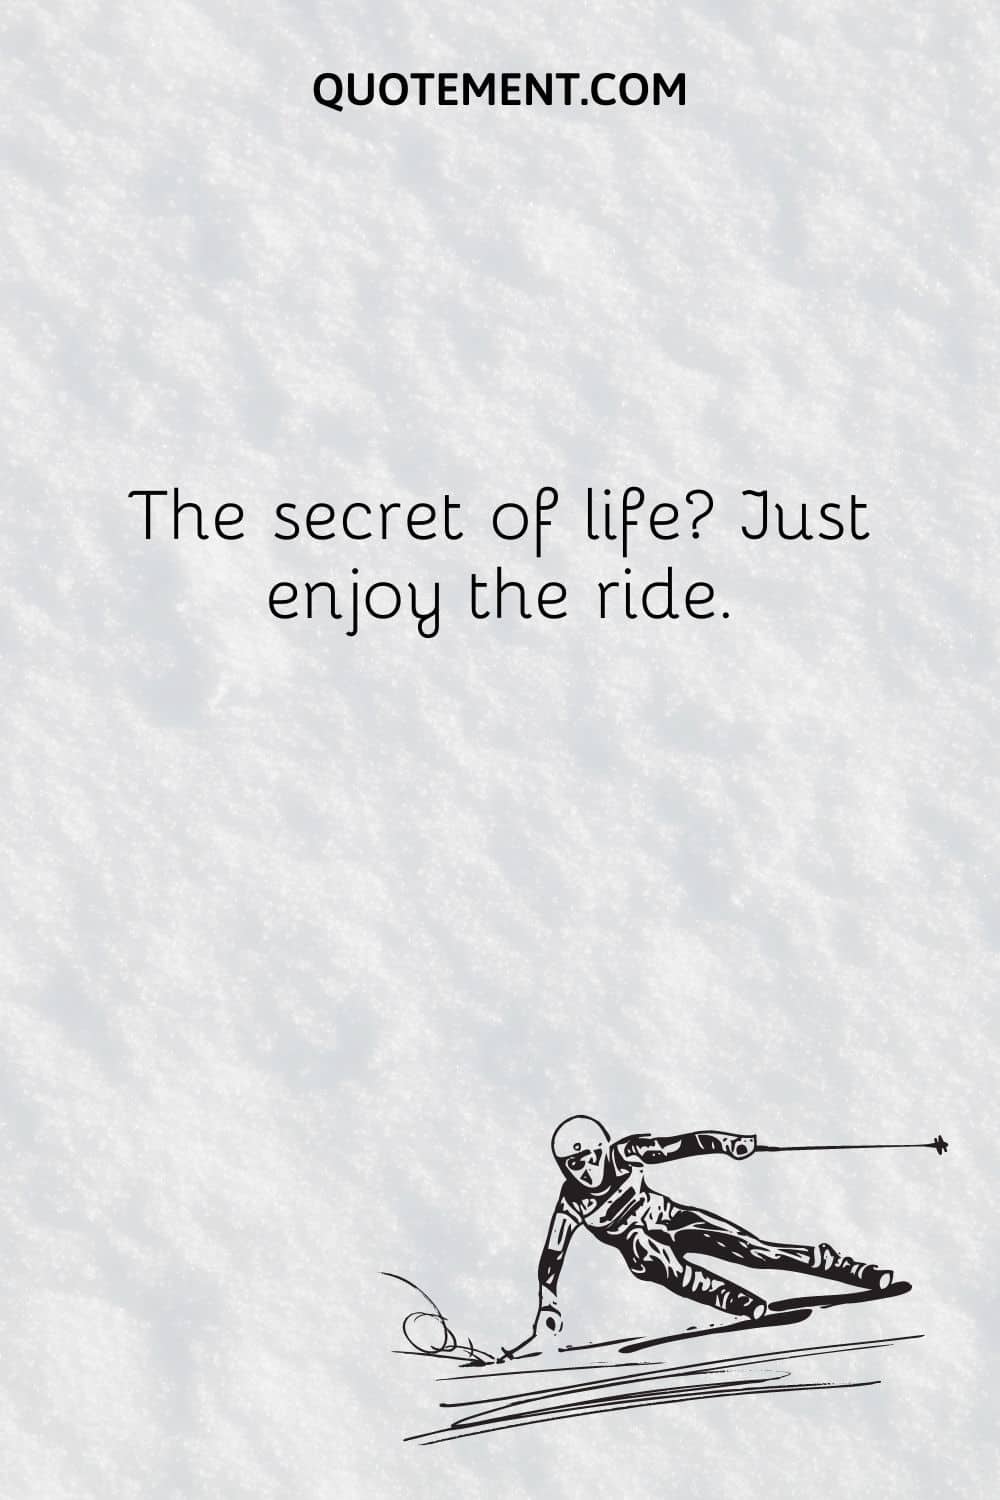 The secret of life Just enjoy the ride.